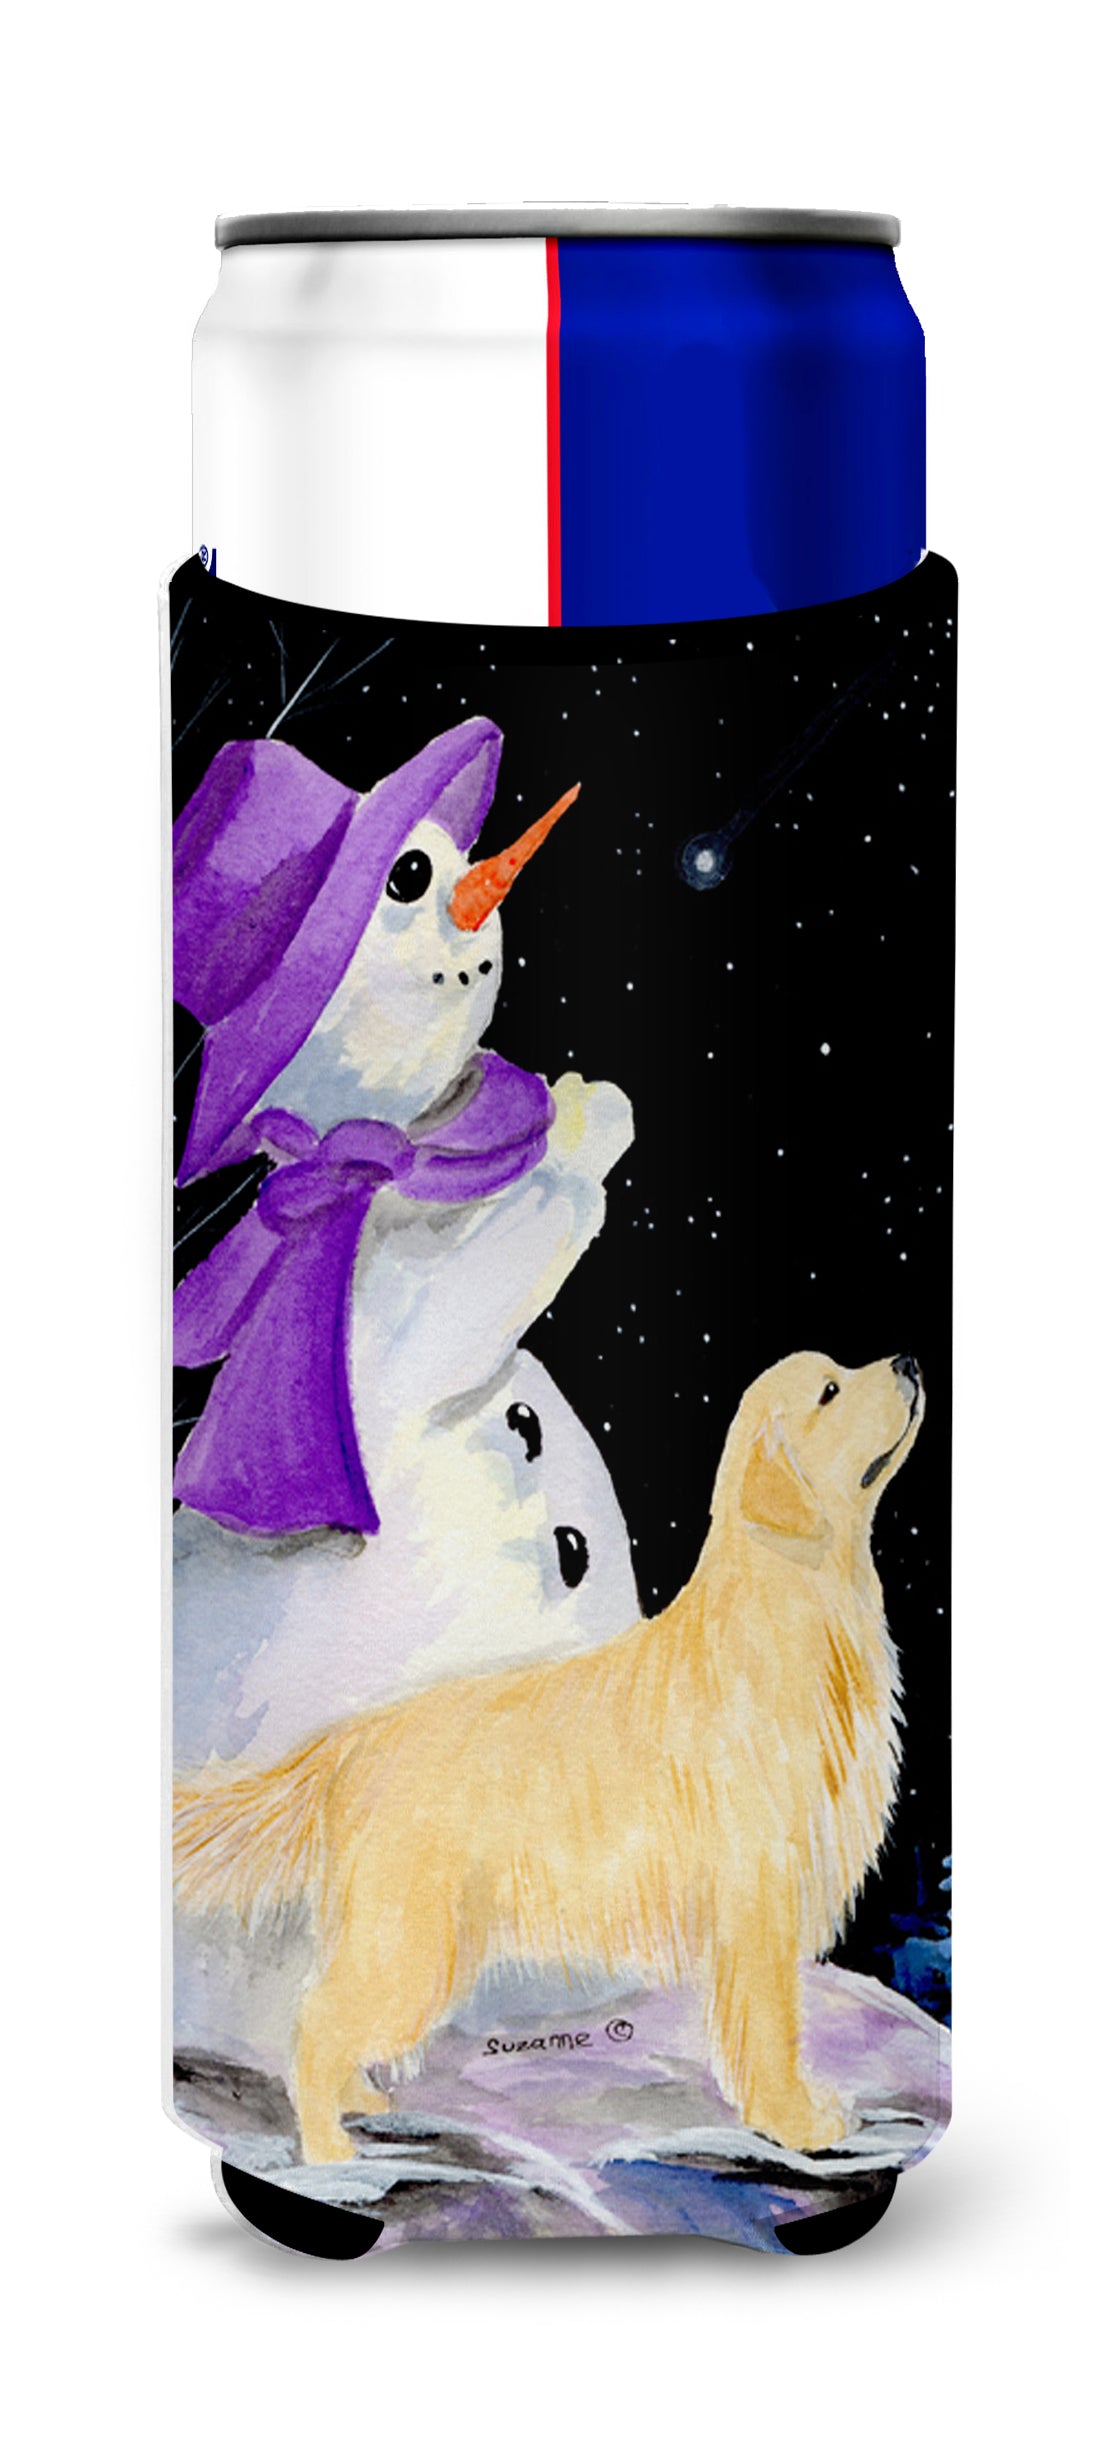 Snowman with Golden Retriever Ultra Beverage Insulators for slim cans SS8950MUK